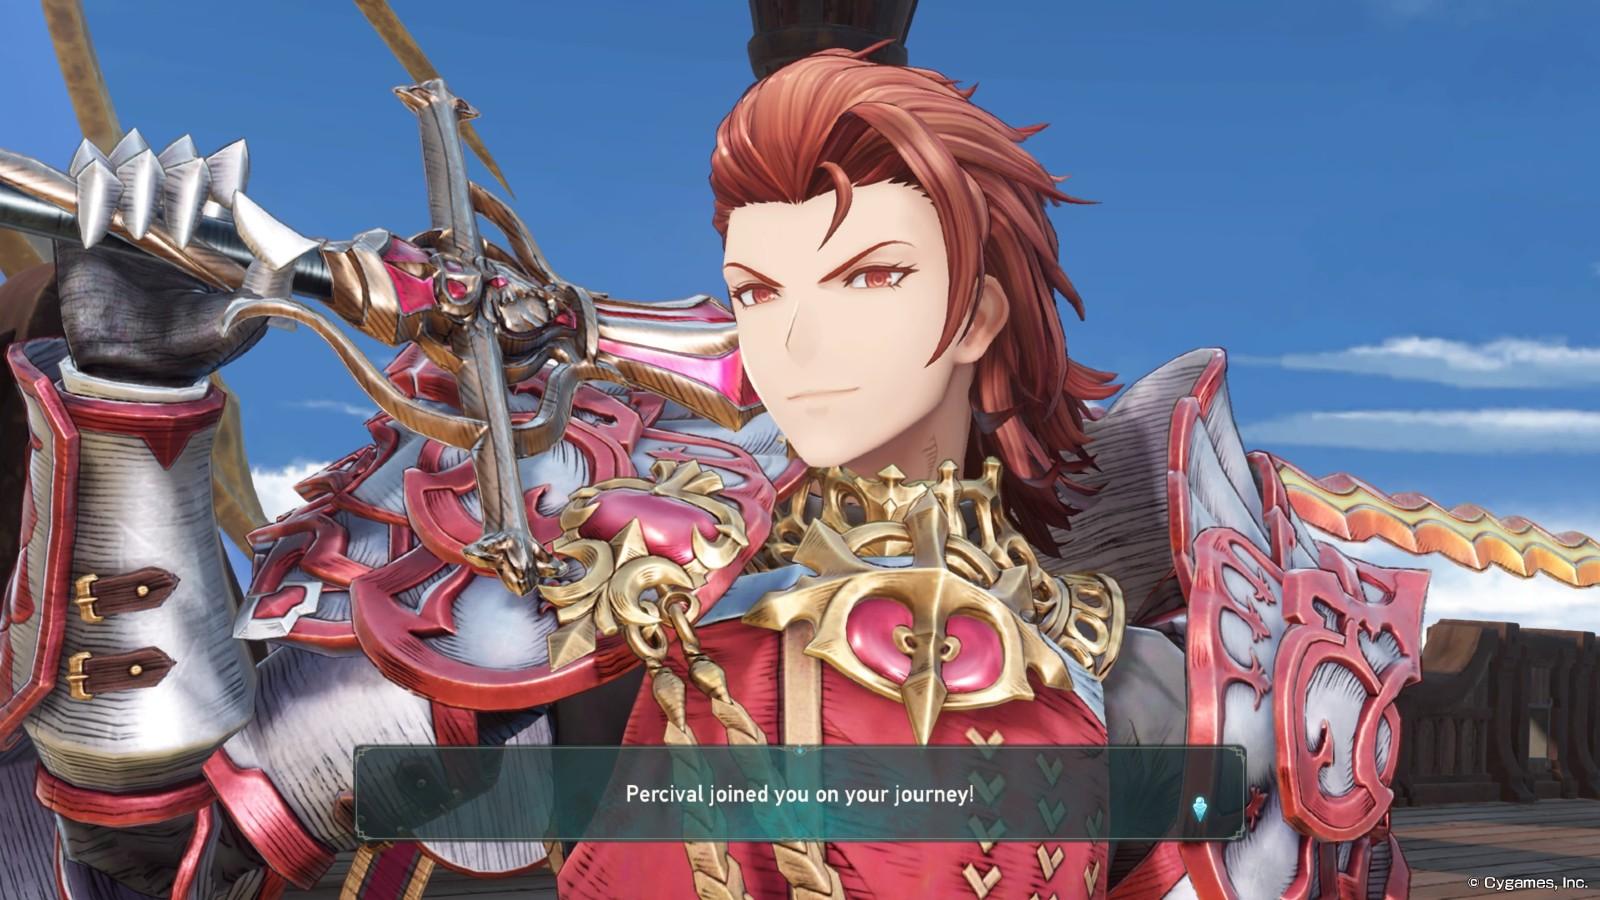 Does Granblue Fantasy: Relink have Early Access? - Dot Esports